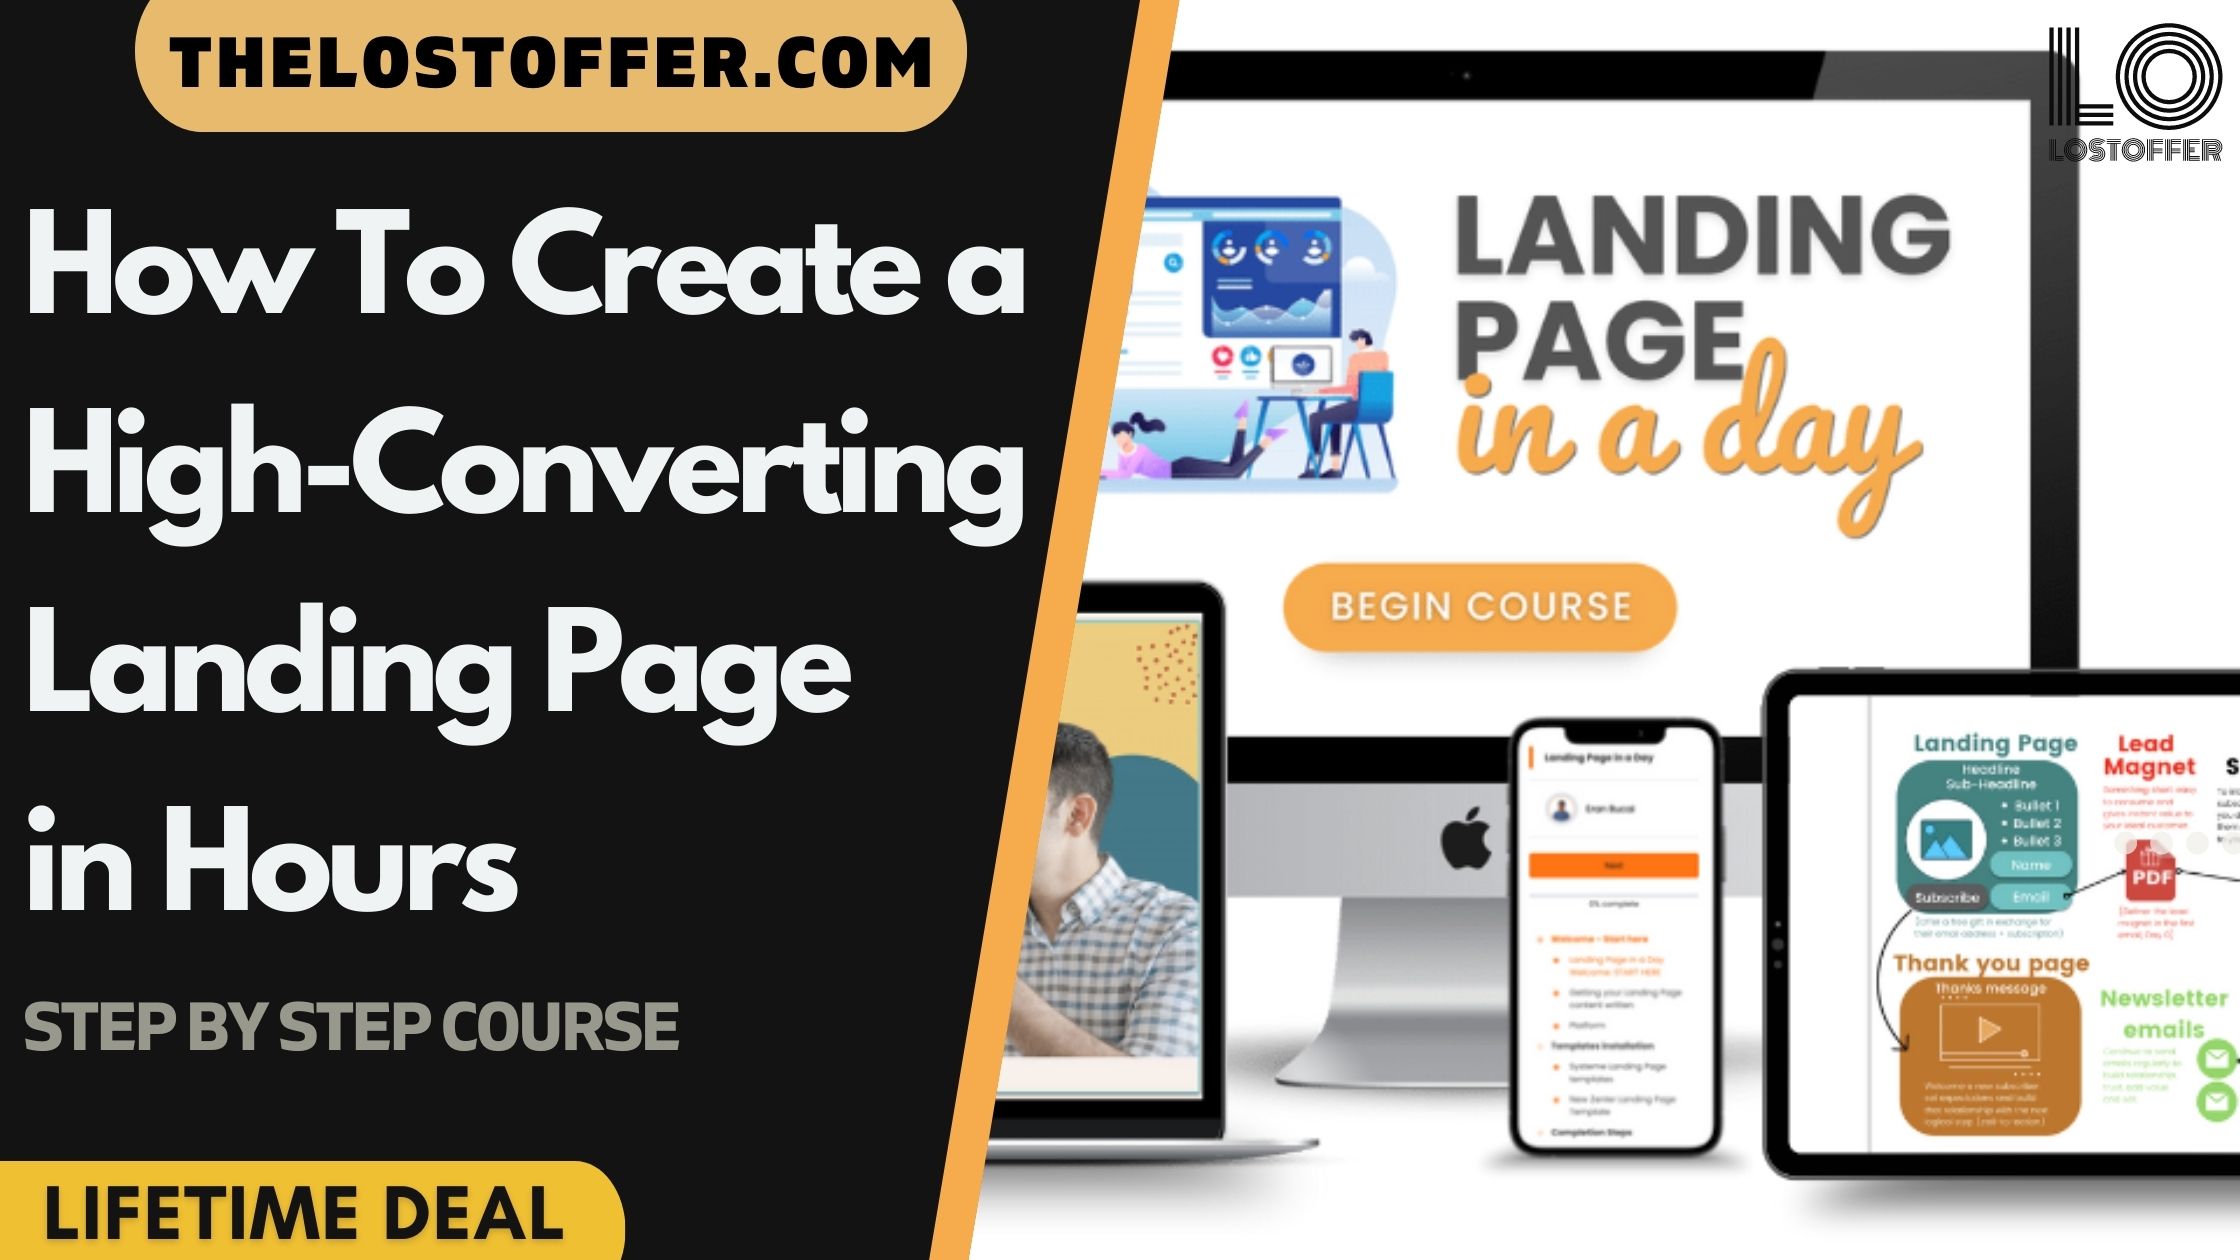 How To Create Your High-Converting Landing Page in Hours - THELOSTOFFER